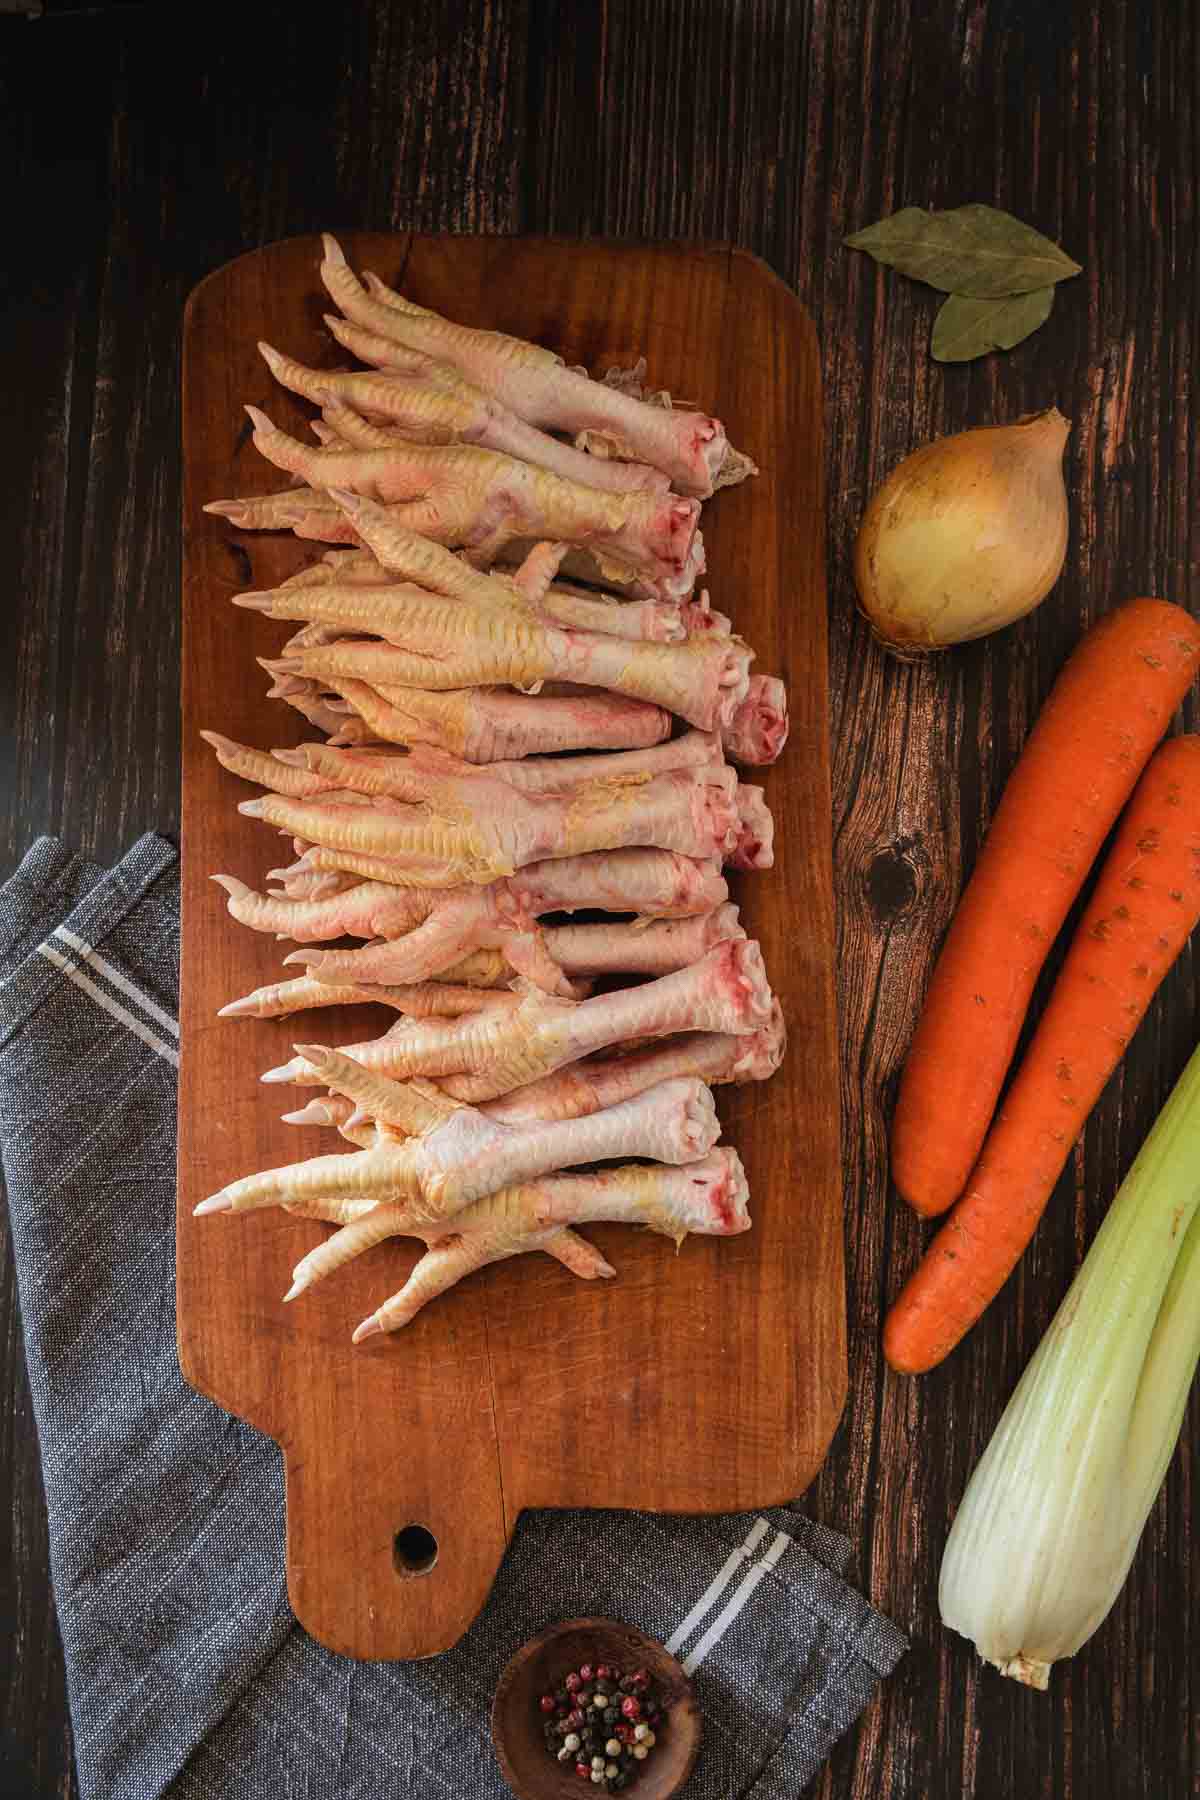 All of the ingredients needed to make chicken feet bone broth stock.